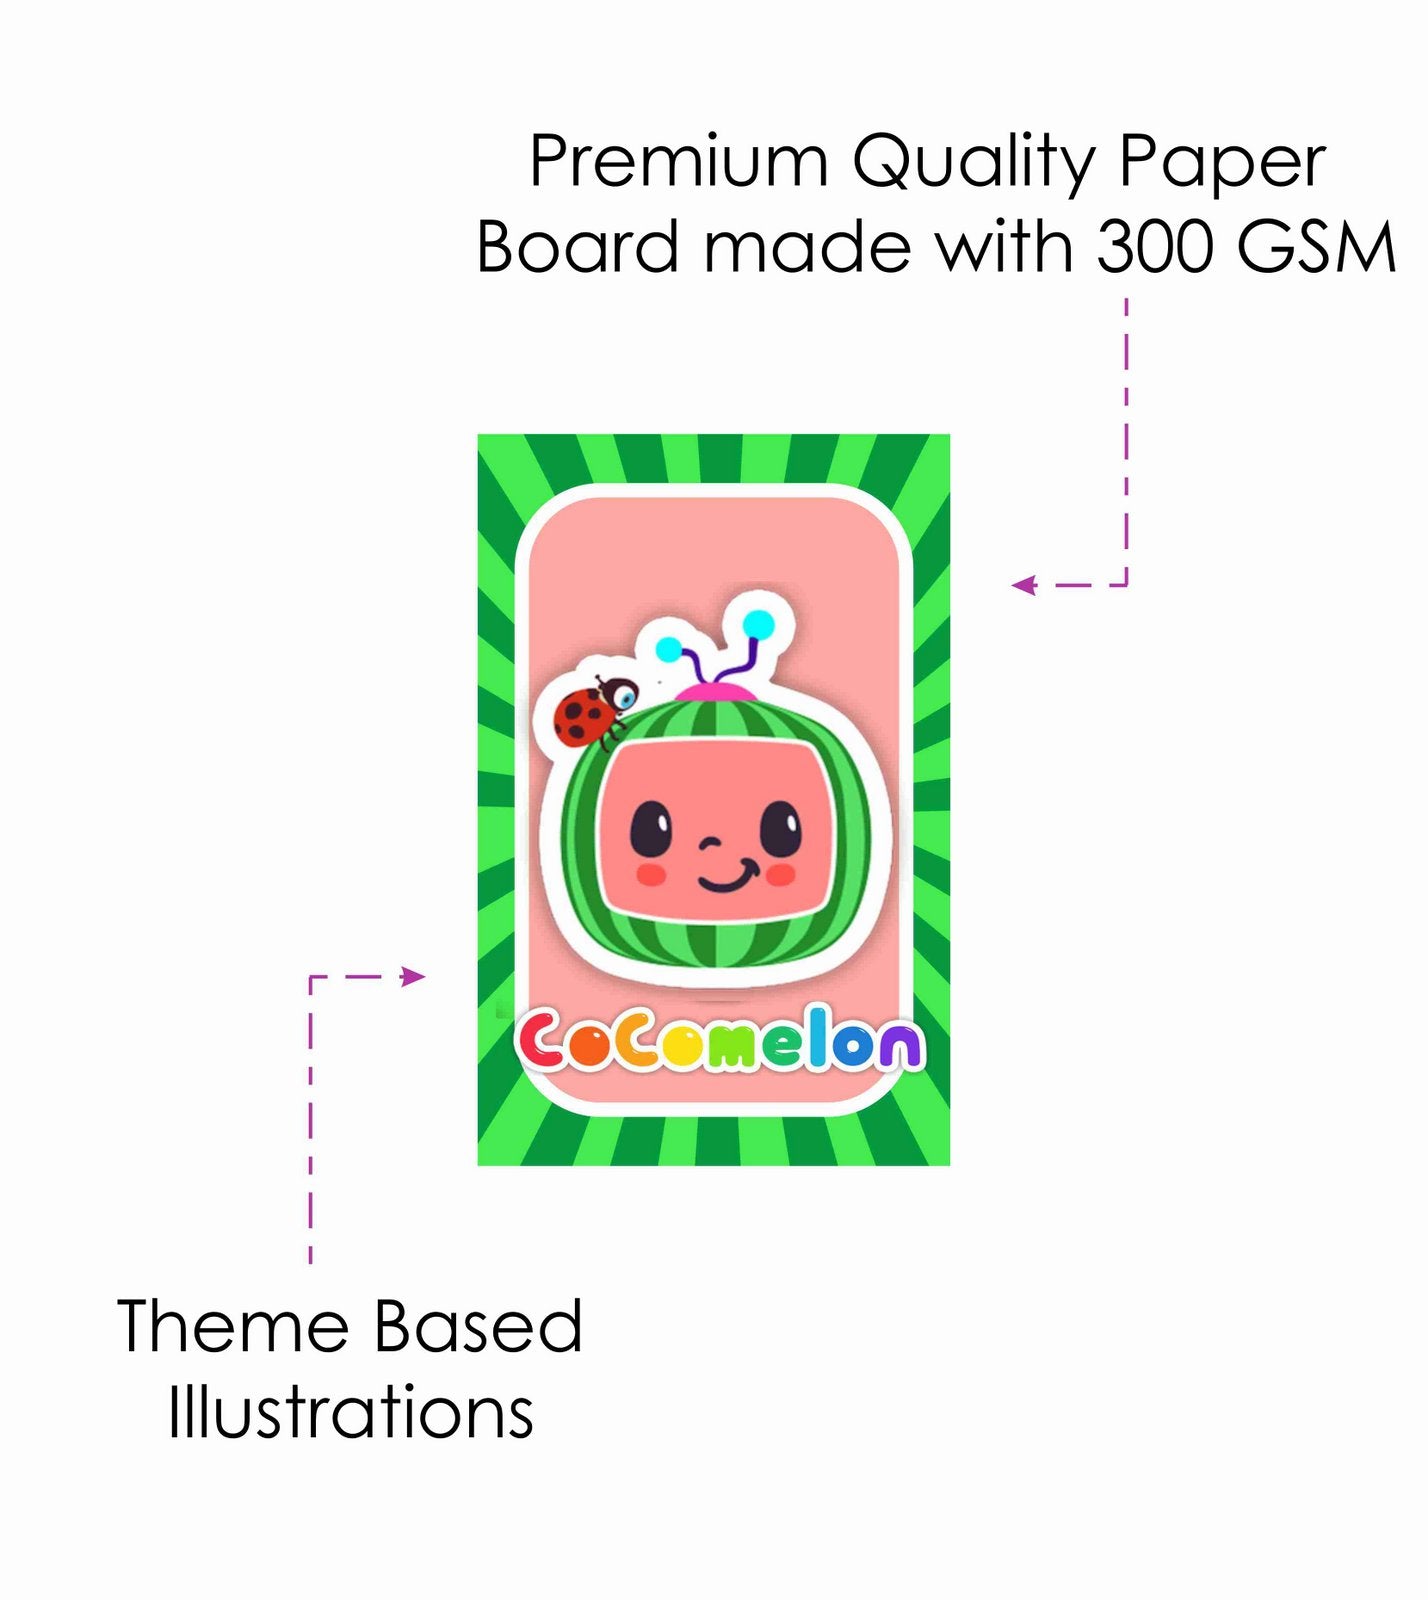 Cocomelon Theme Children's Birthday Party Invitations Cards with Envelopes - Kids Birthday Party Invitations for Boys or Girls,- Invitation Cards (Pack of 10)